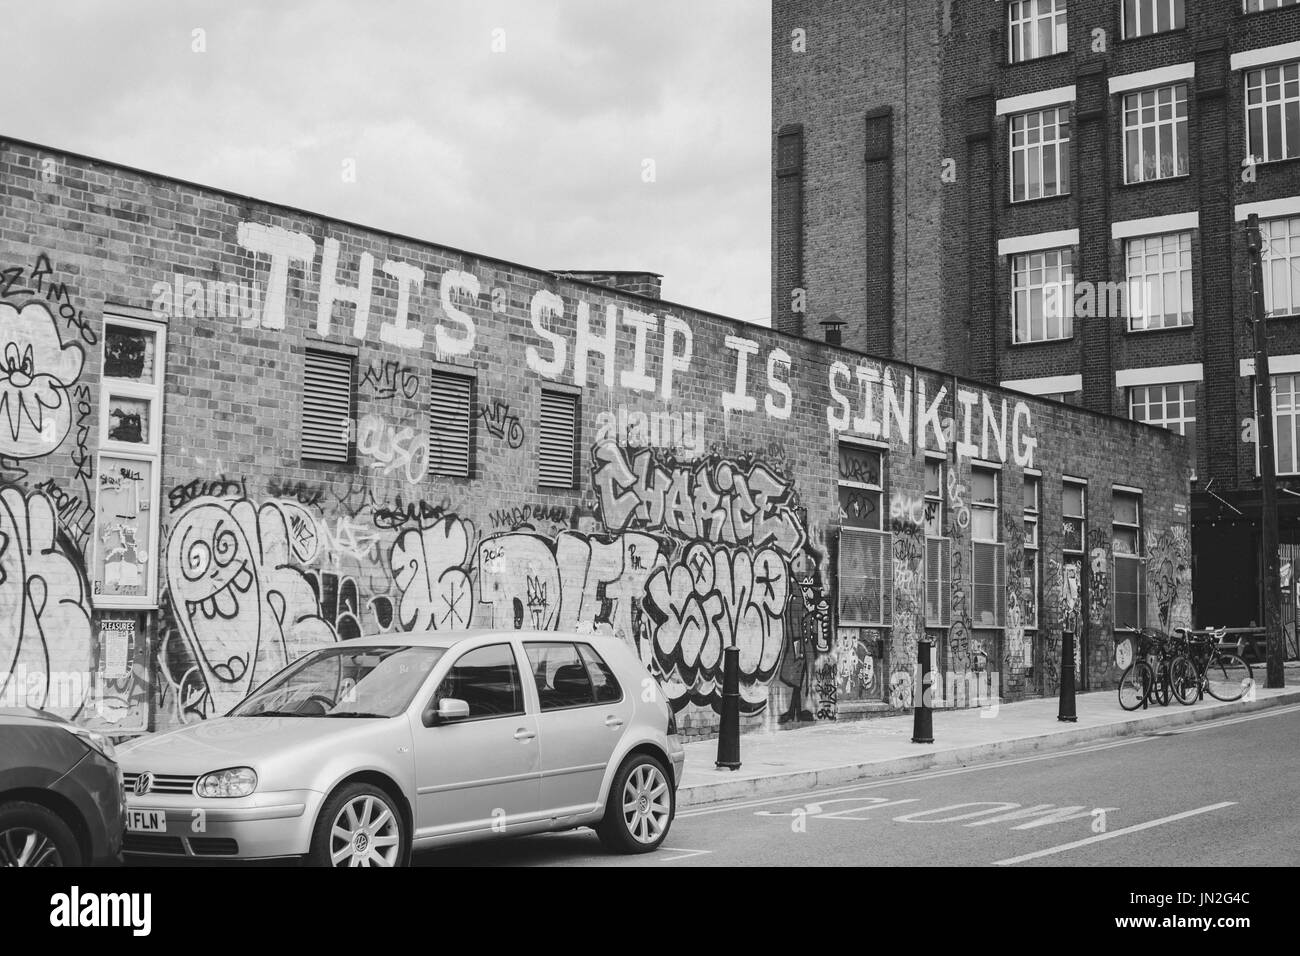 Street in Hackney Wick, east London, with graffiti on wall reading 'This ship is sinking'. Stock Photo